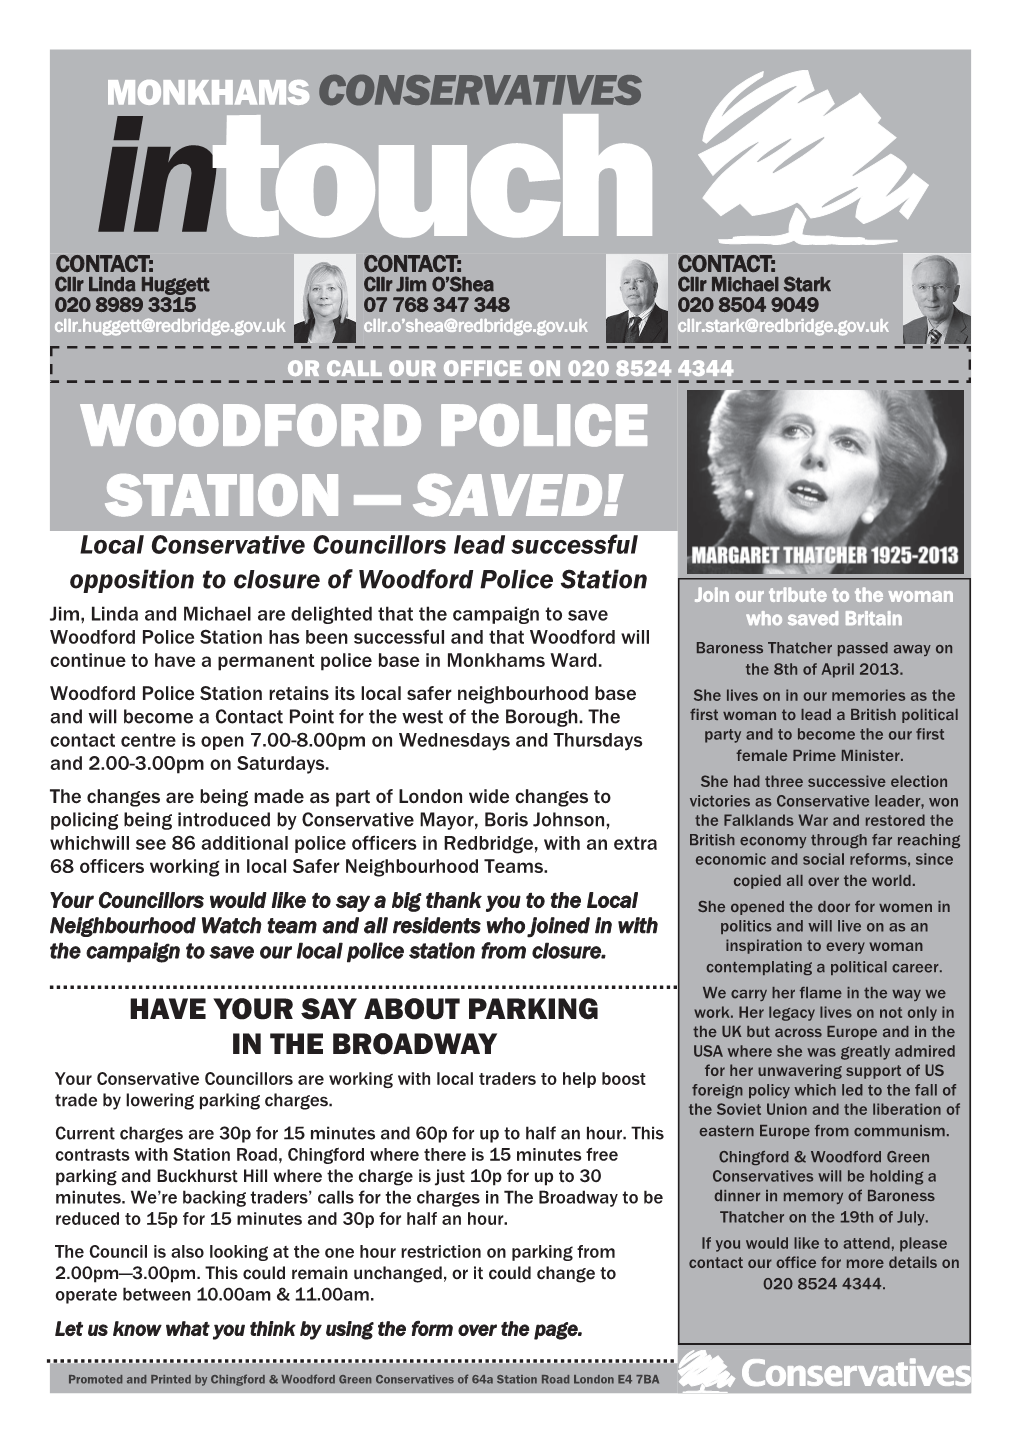 Woodford Police Station — Saved!